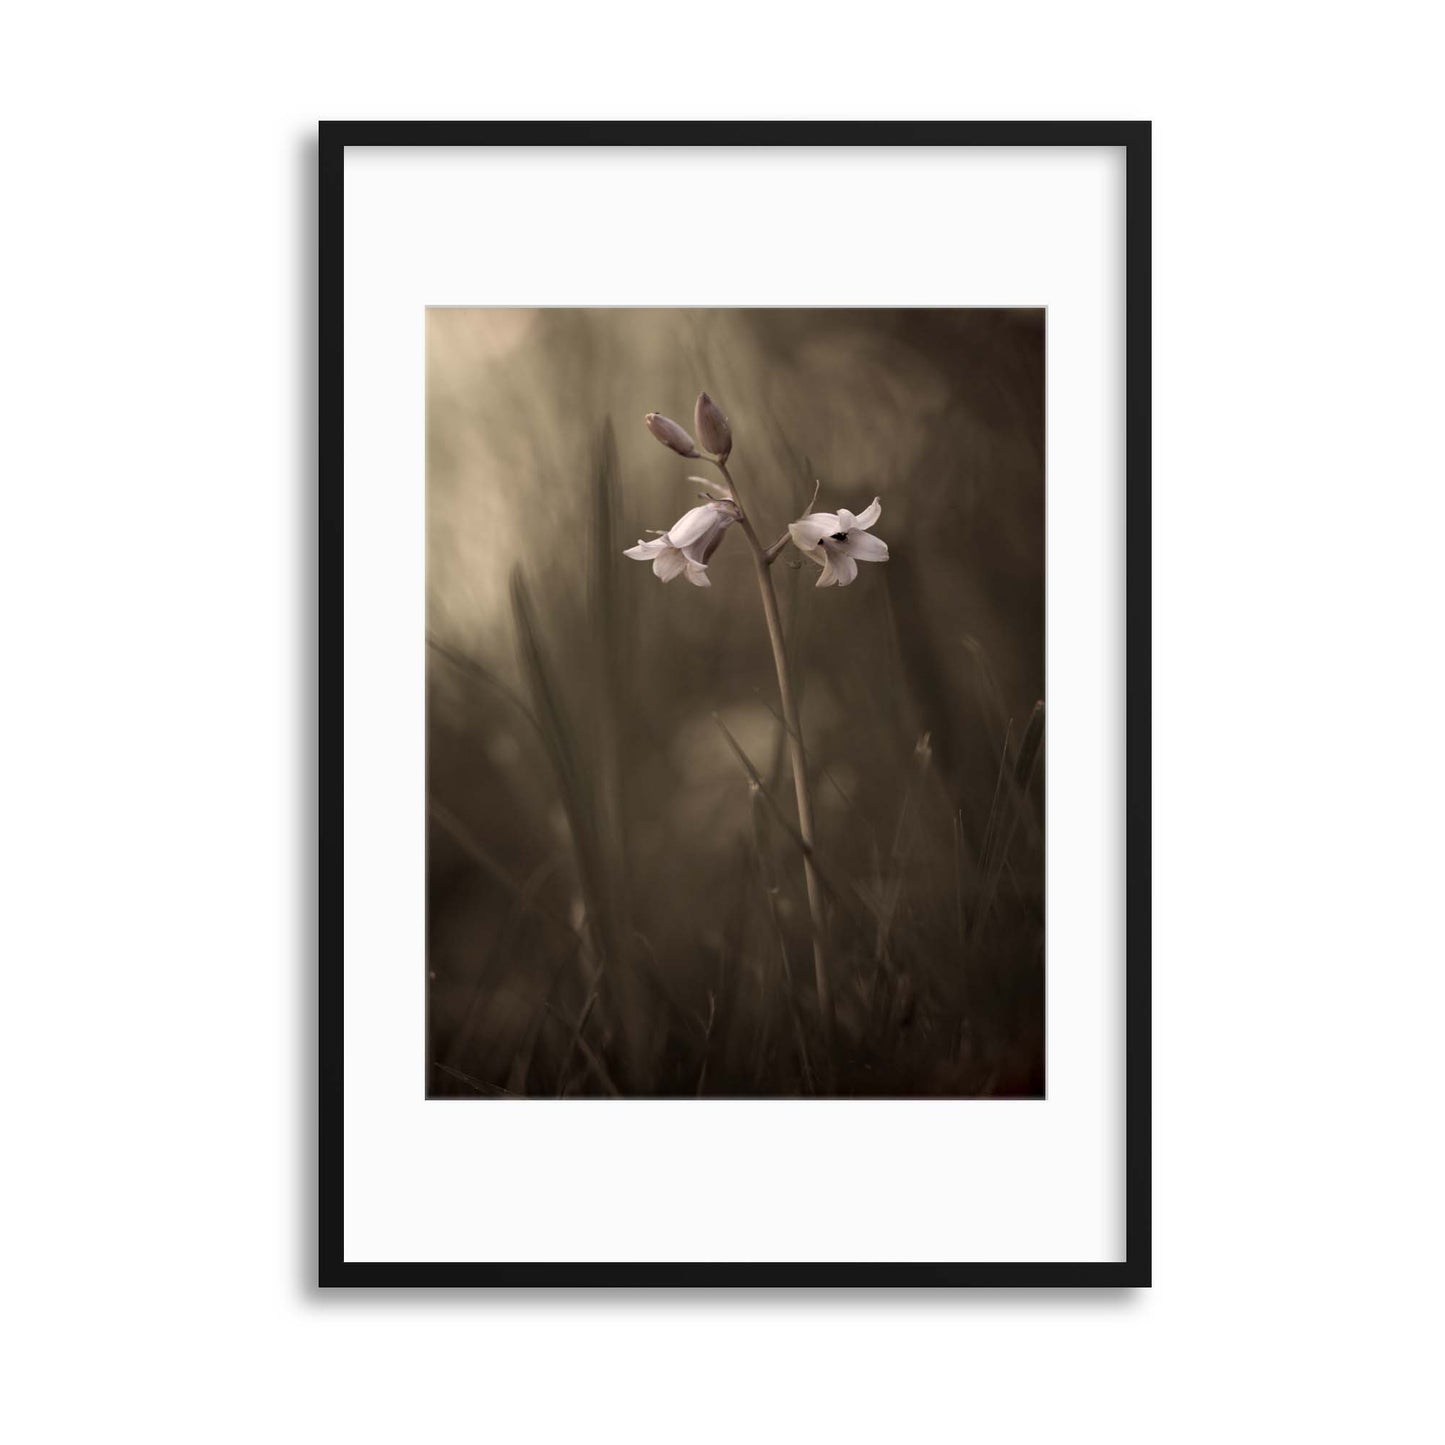 A Small Flower on the Ground by Allan Wallberg Framed Print - USTAD HOME